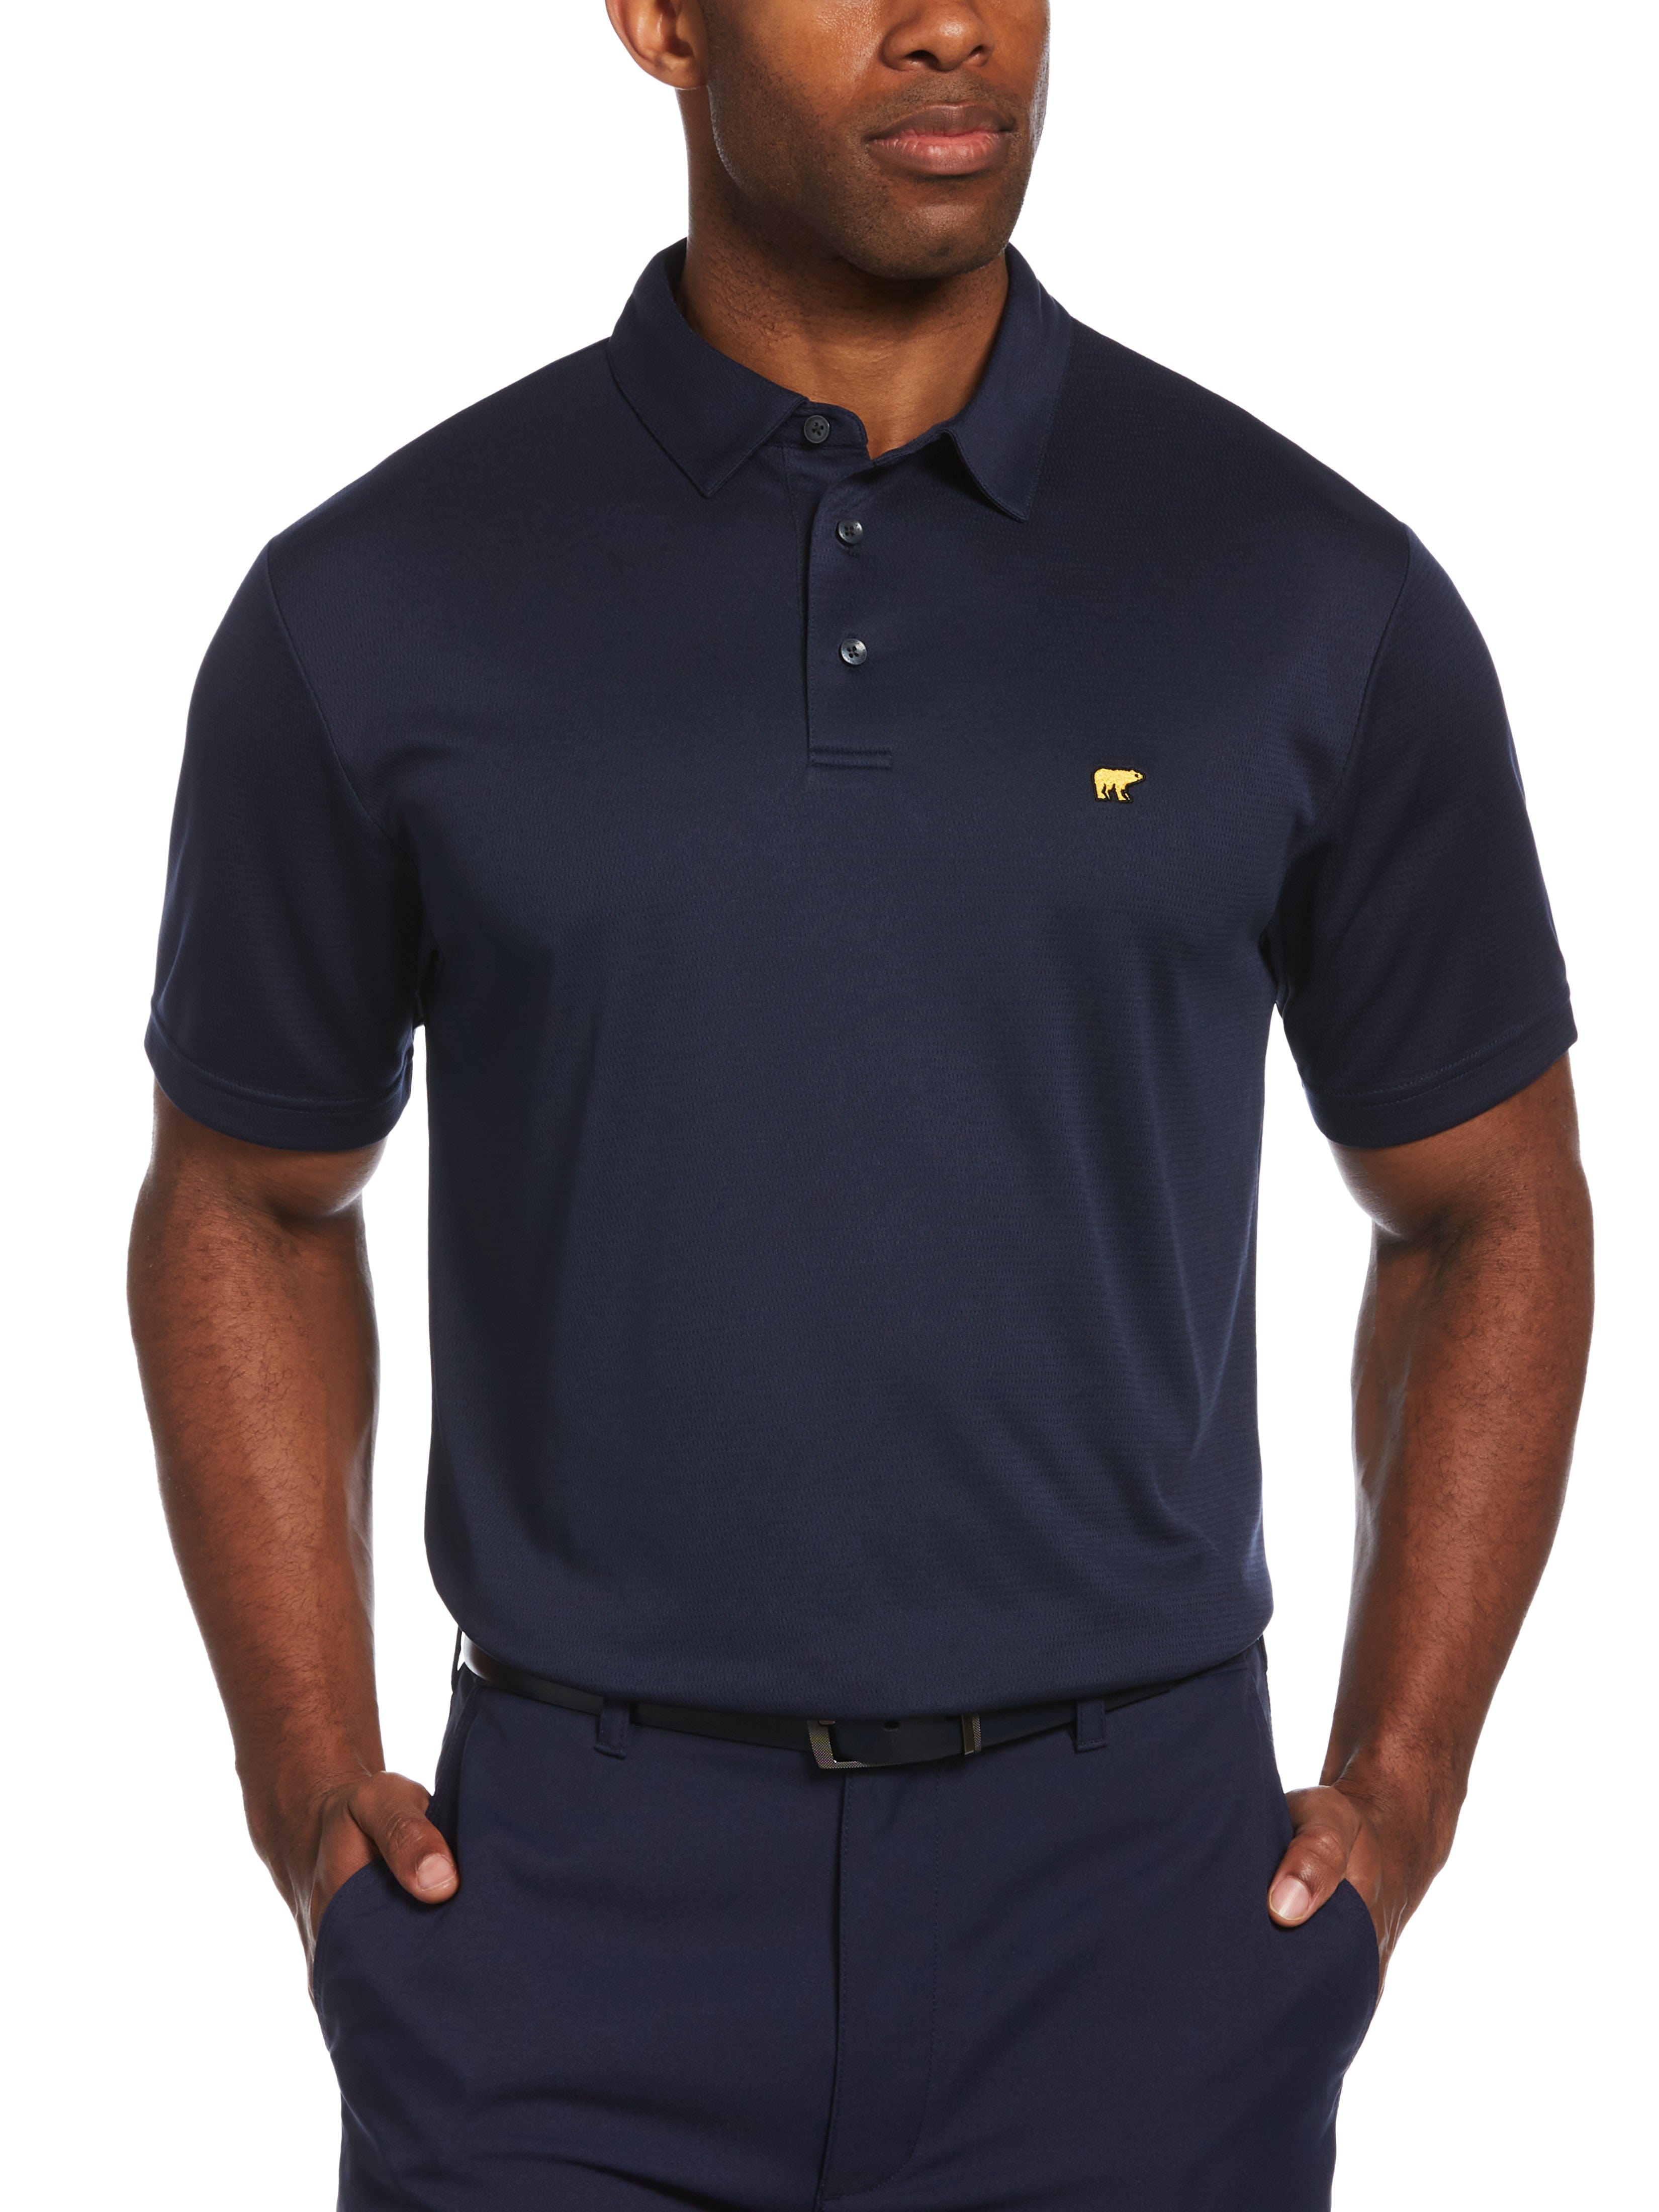 Jack Nicklaus Mens Solid Textured Golf Polo Shirt, Size 3XL, Classic Navy Blue, 100% Polyester | Golf Apparel Shop